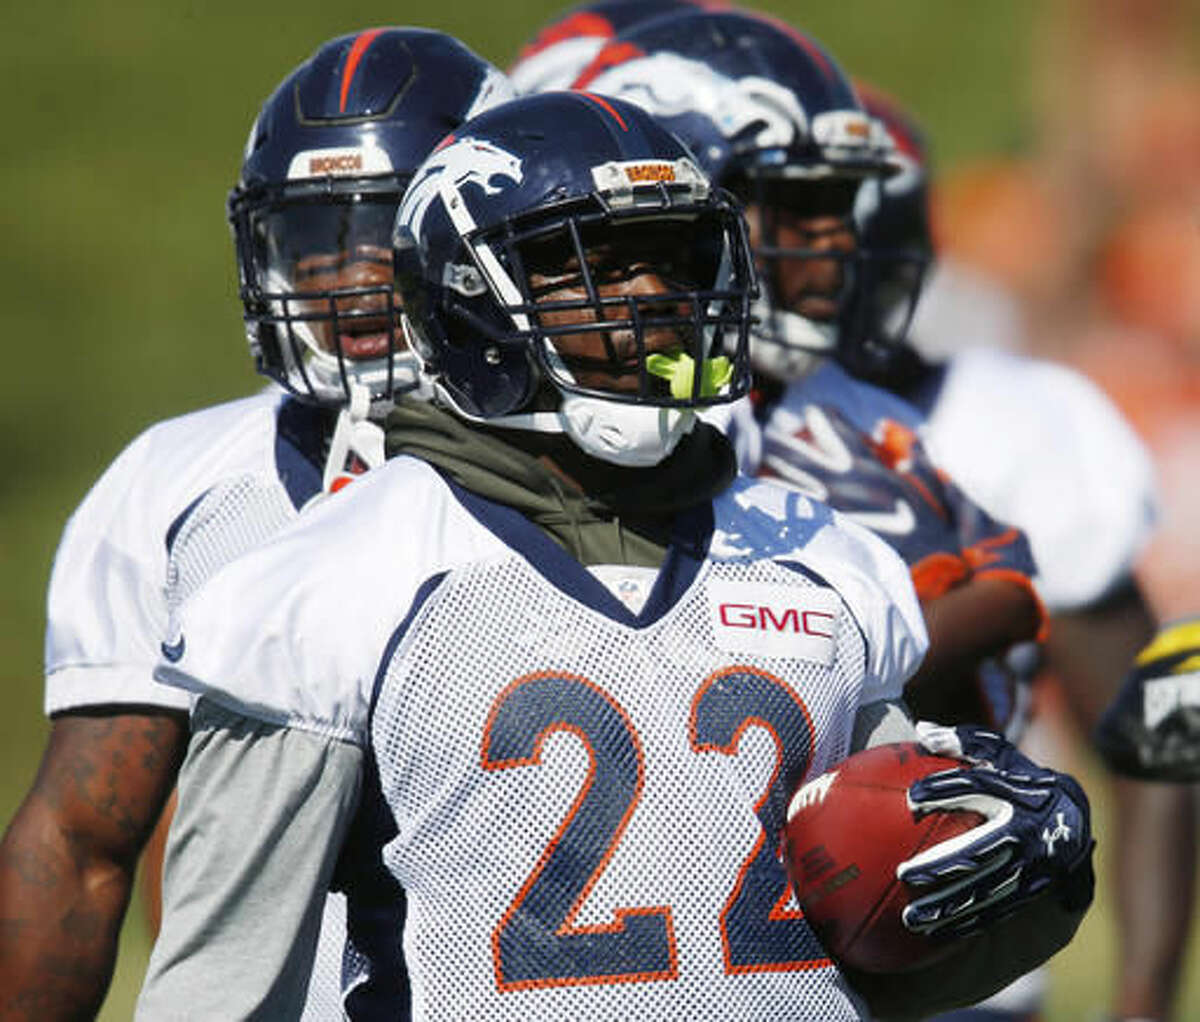 FILe - In this Monday, Aug. 8, 2016, file photo, Denver Broncos running back C.J. Anderson takes part in drills during the team's NFL football practice in Englewood, Colo. Anderson, who has been a mainstay in the team's backfield the past couple seasons, is fighting for playing time with rookie Devontae Booker, which has created a quandary for the Broncos' coaches. (AP Photo/David Zalubowski, file)